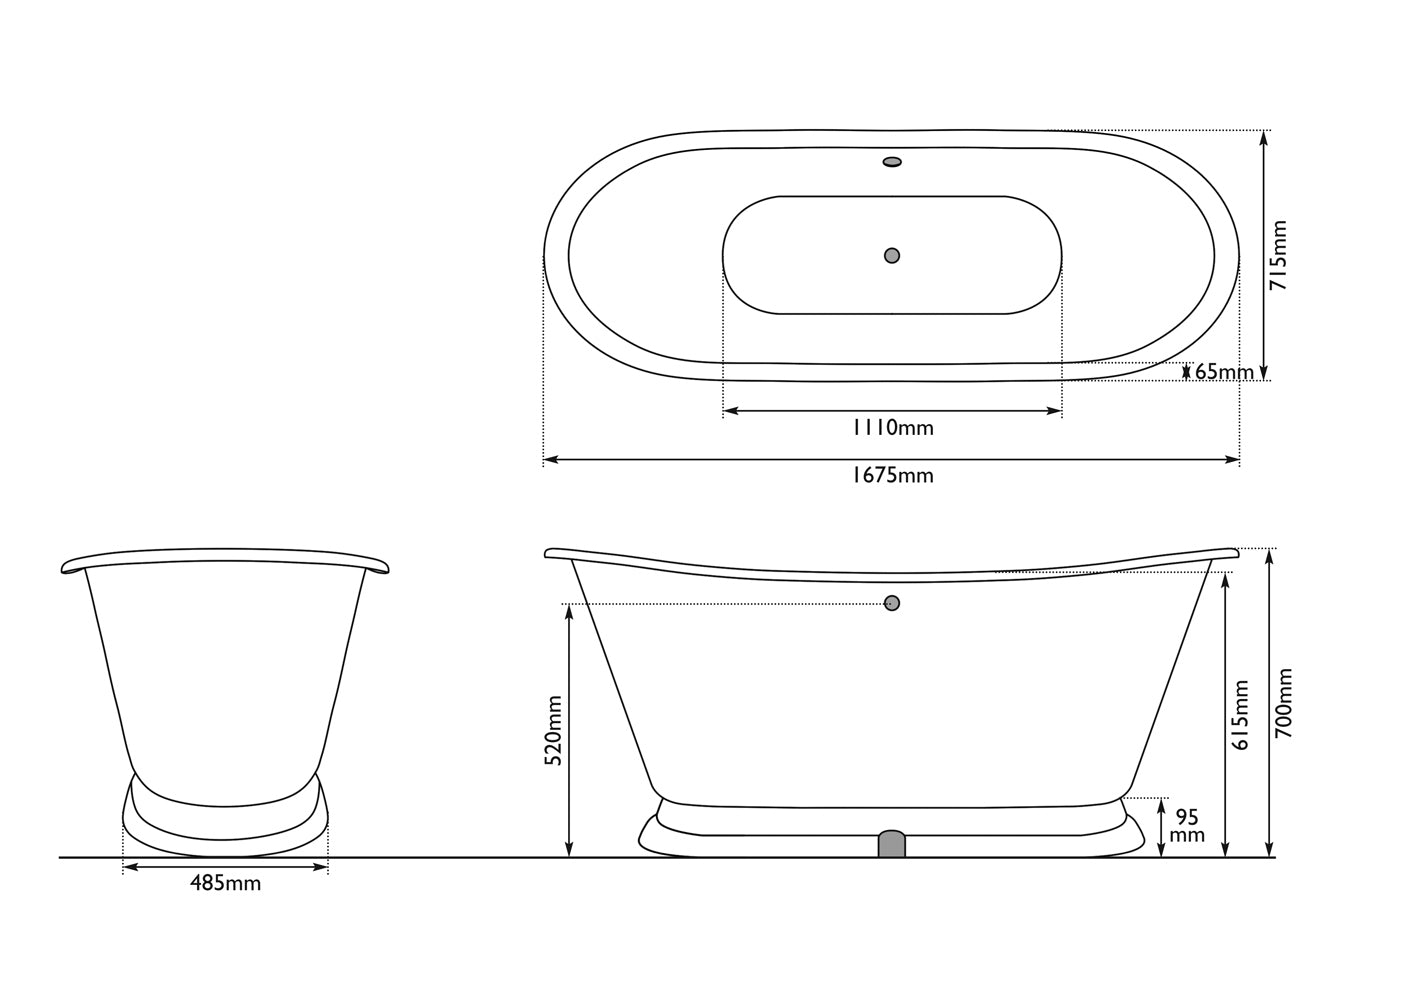 Hurlingham Galleon Freestanding Cast Iron Roll Top Bath, Bespoke Painted in length 1675mm BVC001 specification technical drawing 